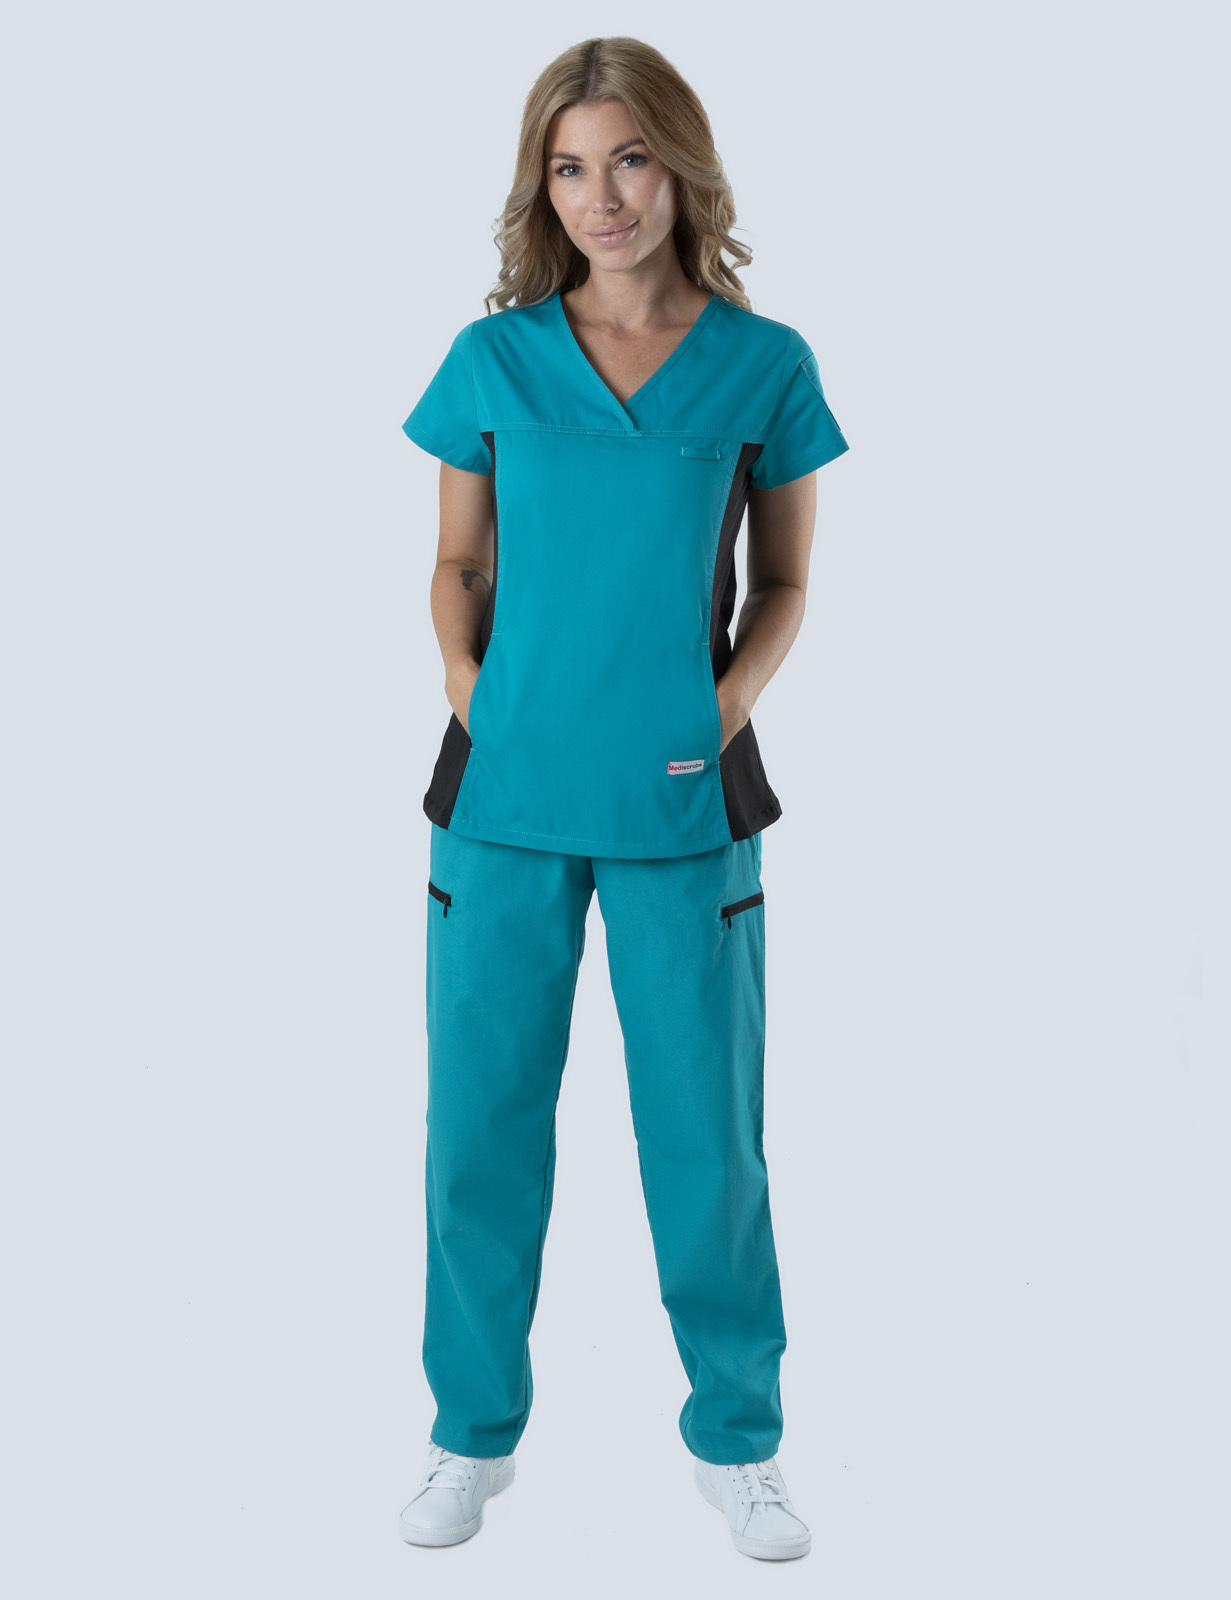 Women's Fit Solid Scrub Top With Spandex Panel - Teal - X Small - 0